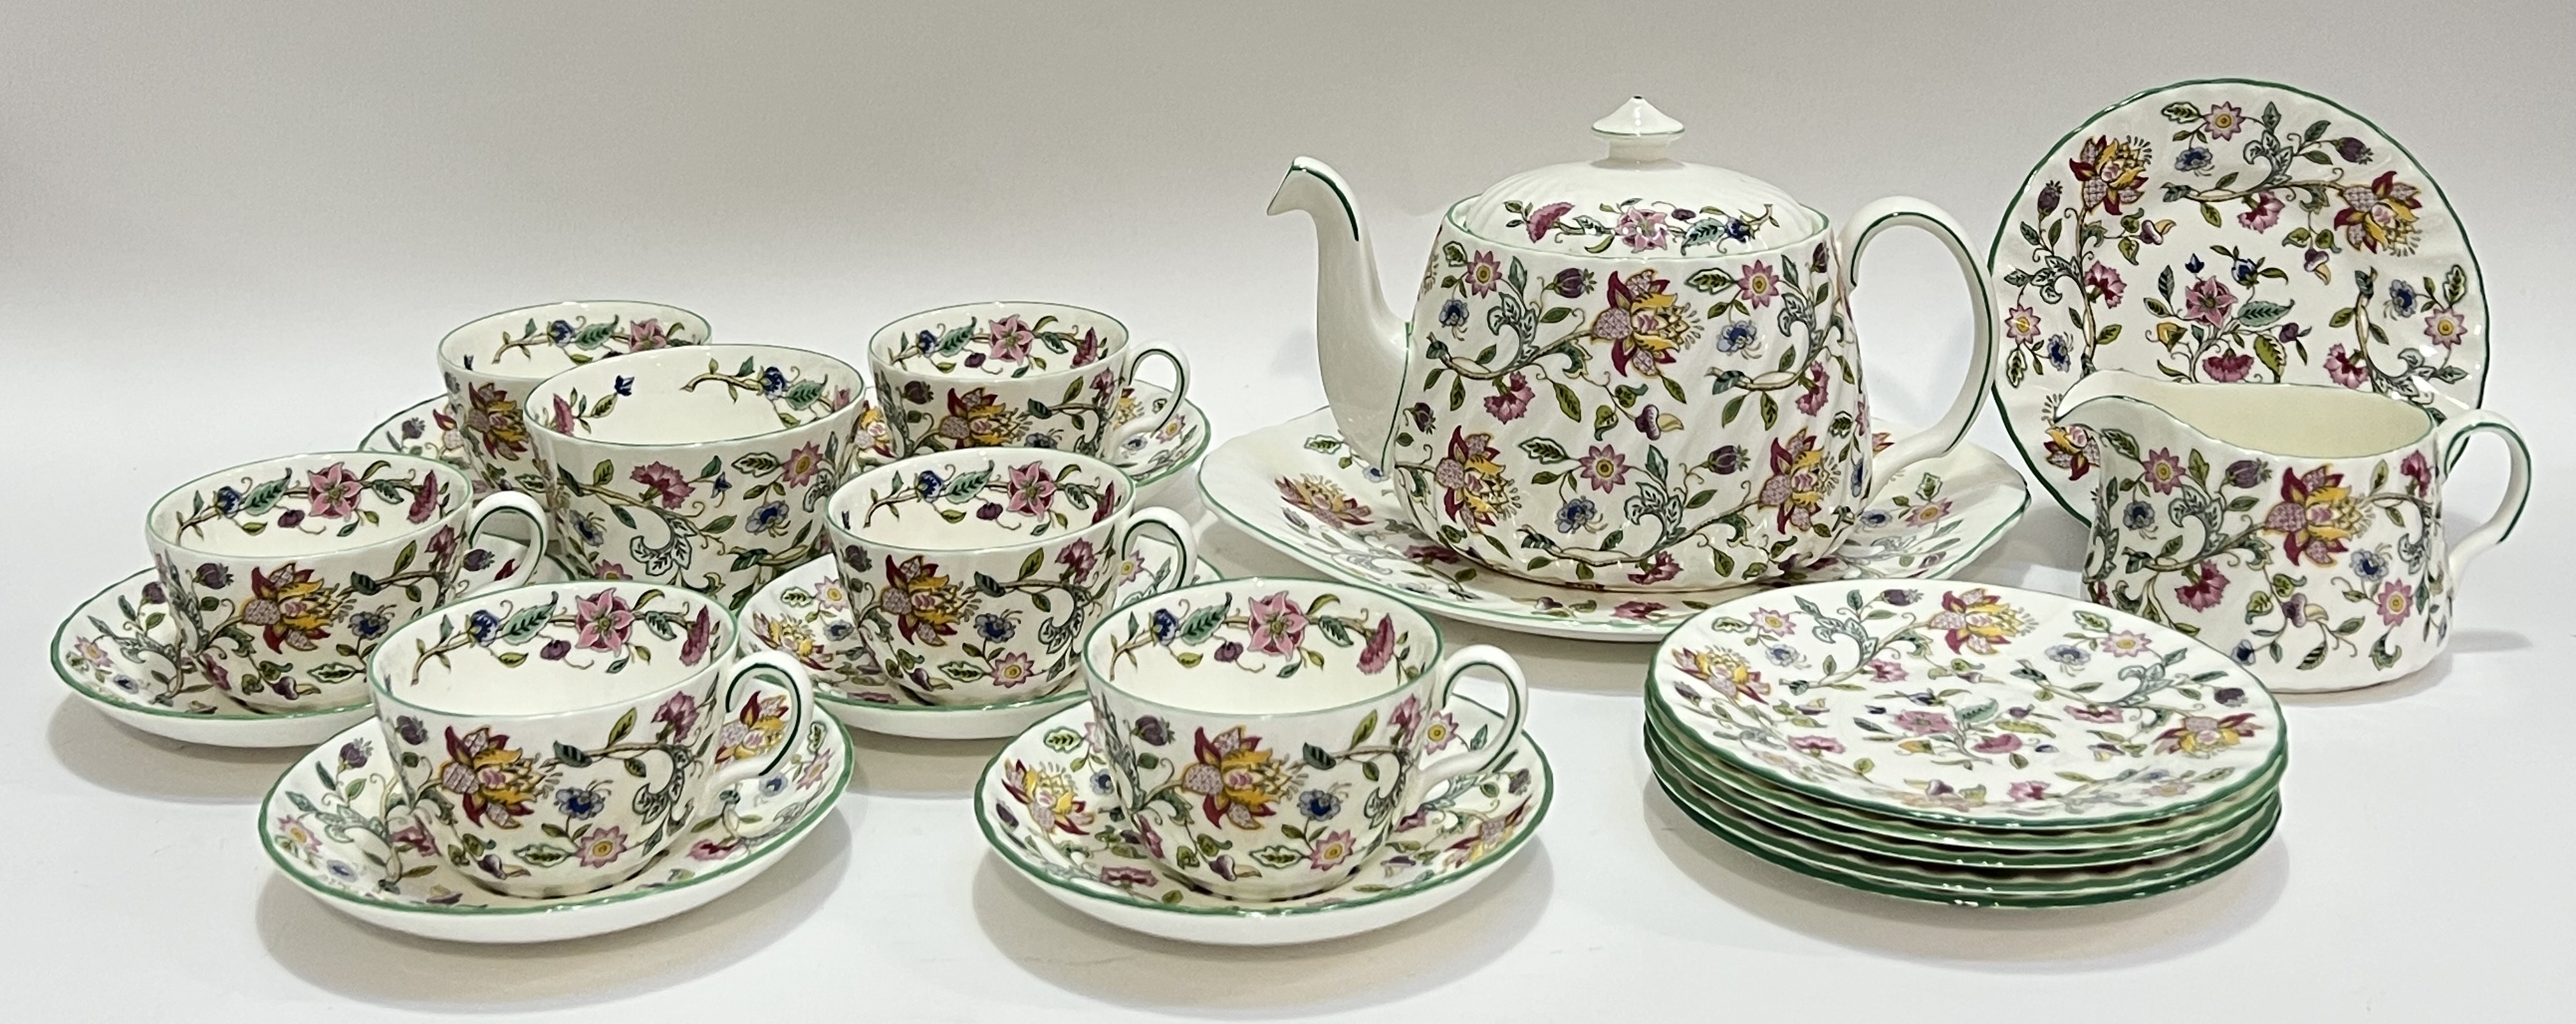 A Minton 'Haddon Hall' tea service decorated with bright floral sprays, comprising a teapot (h- 16cm